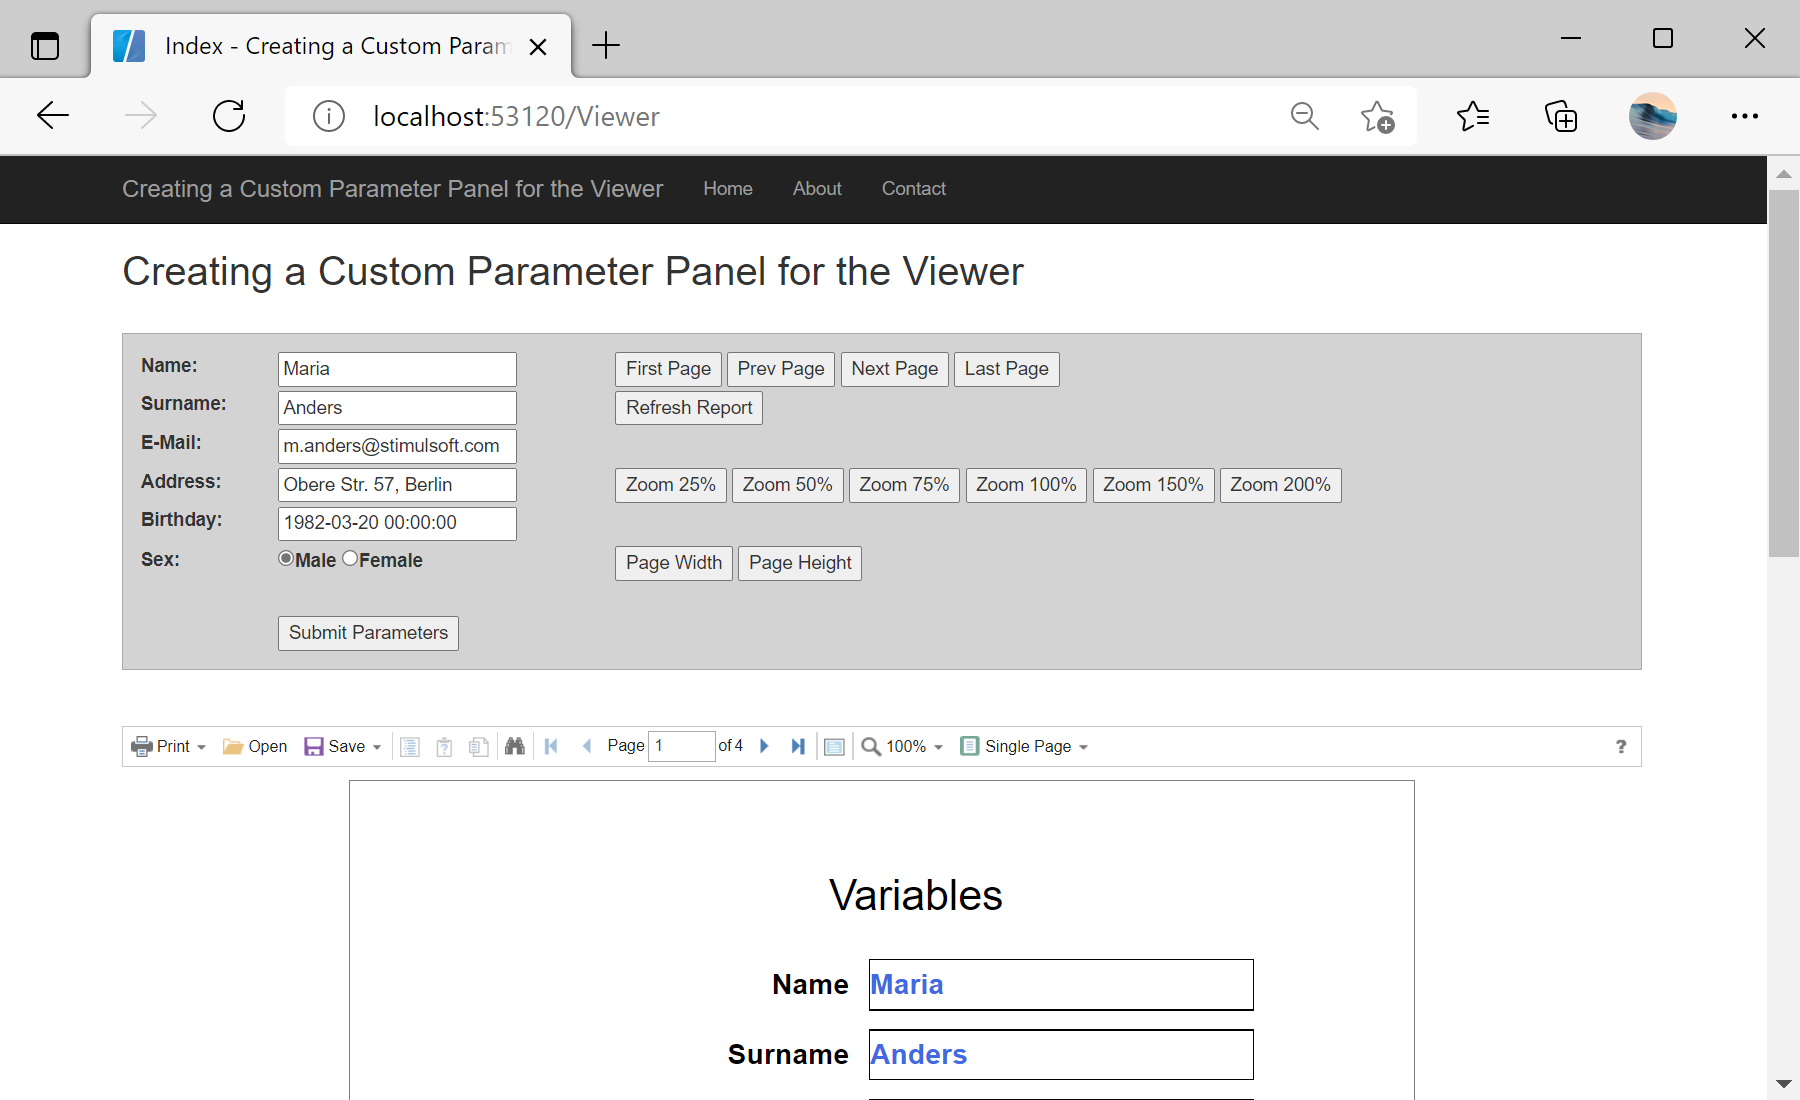 Creating a Custom Parameter Panel for the Viewer